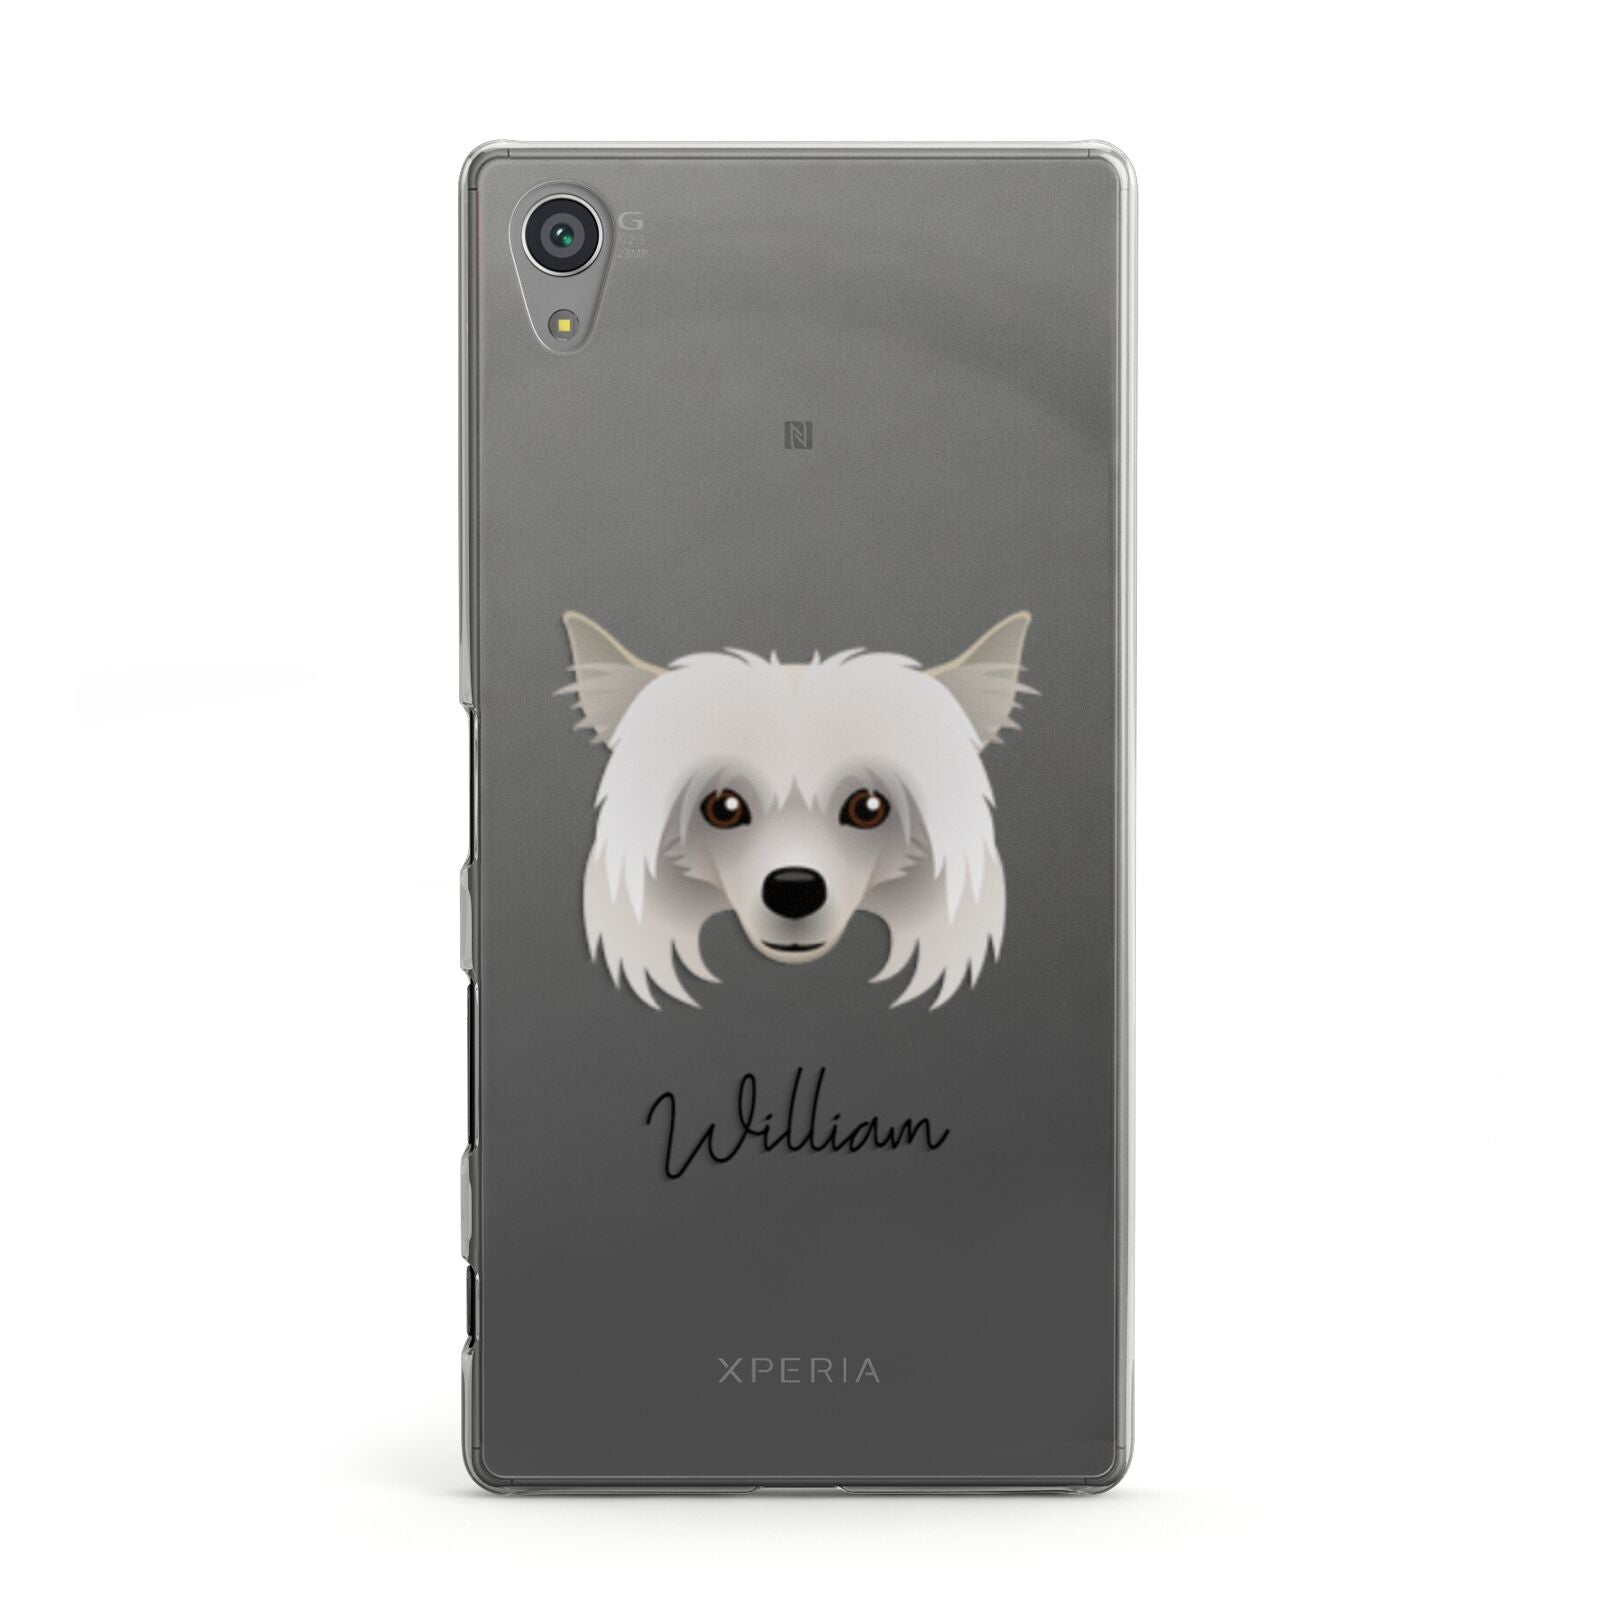 Powderpuff Chinese Crested Personalised Sony Xperia Case